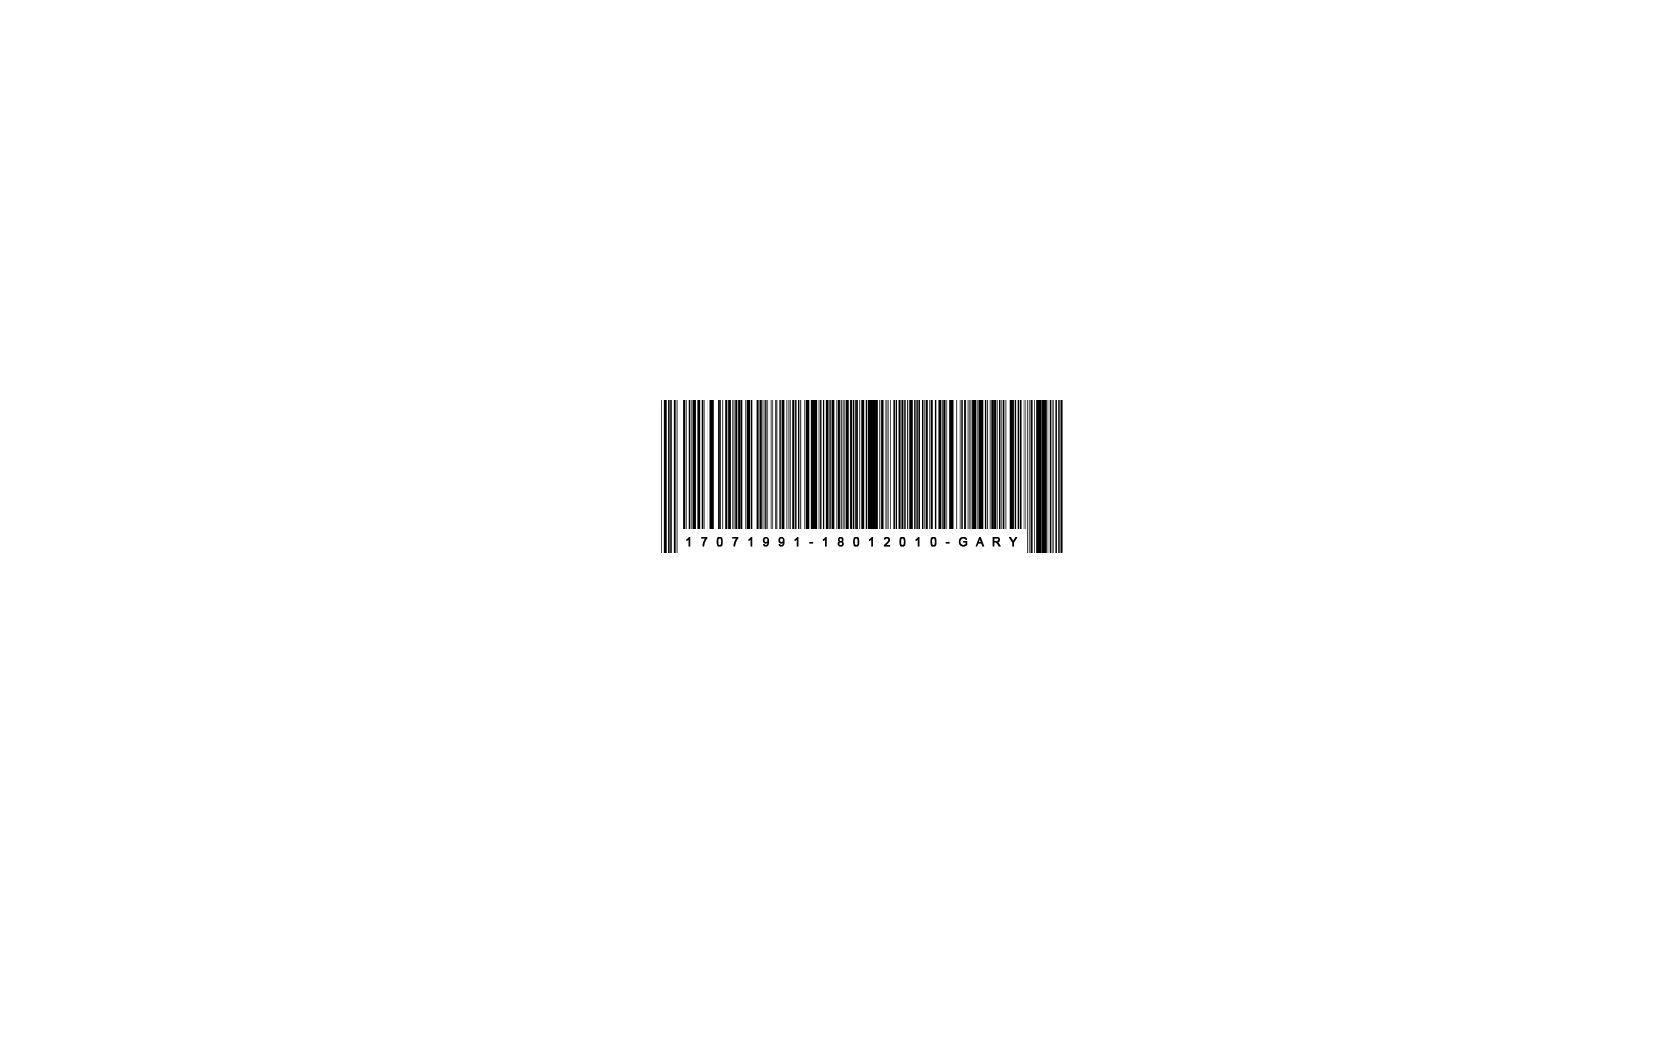 Barcode Wallpaper, 44 PC Barcode Photo in Magnificent Collection